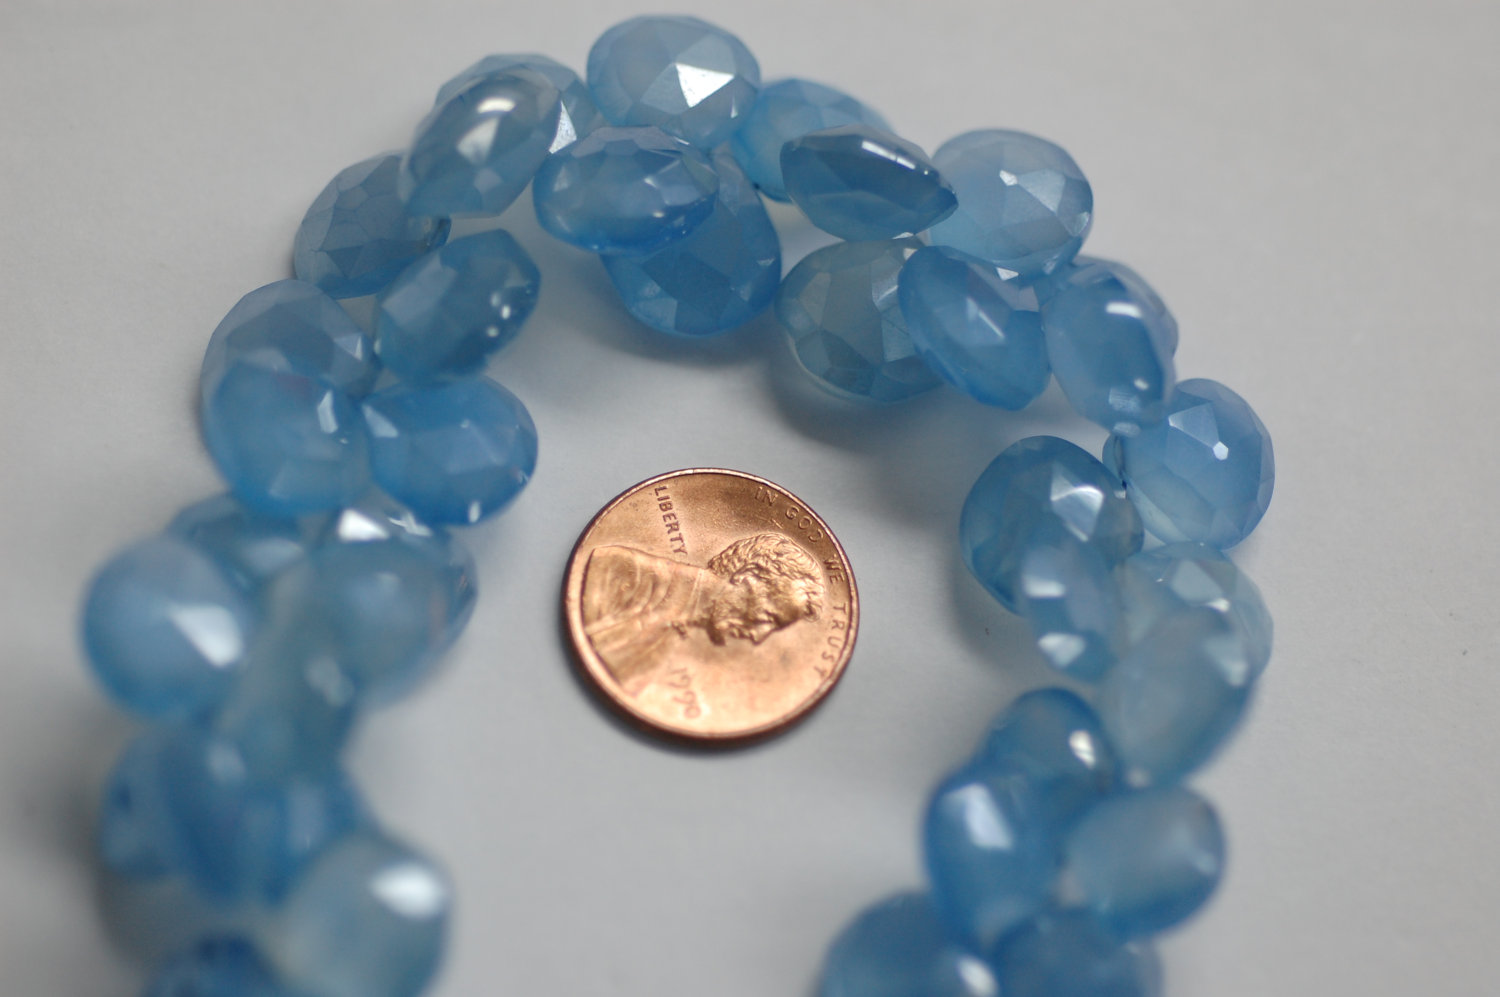 Pearl Blue Chalcedony Heart Faceted